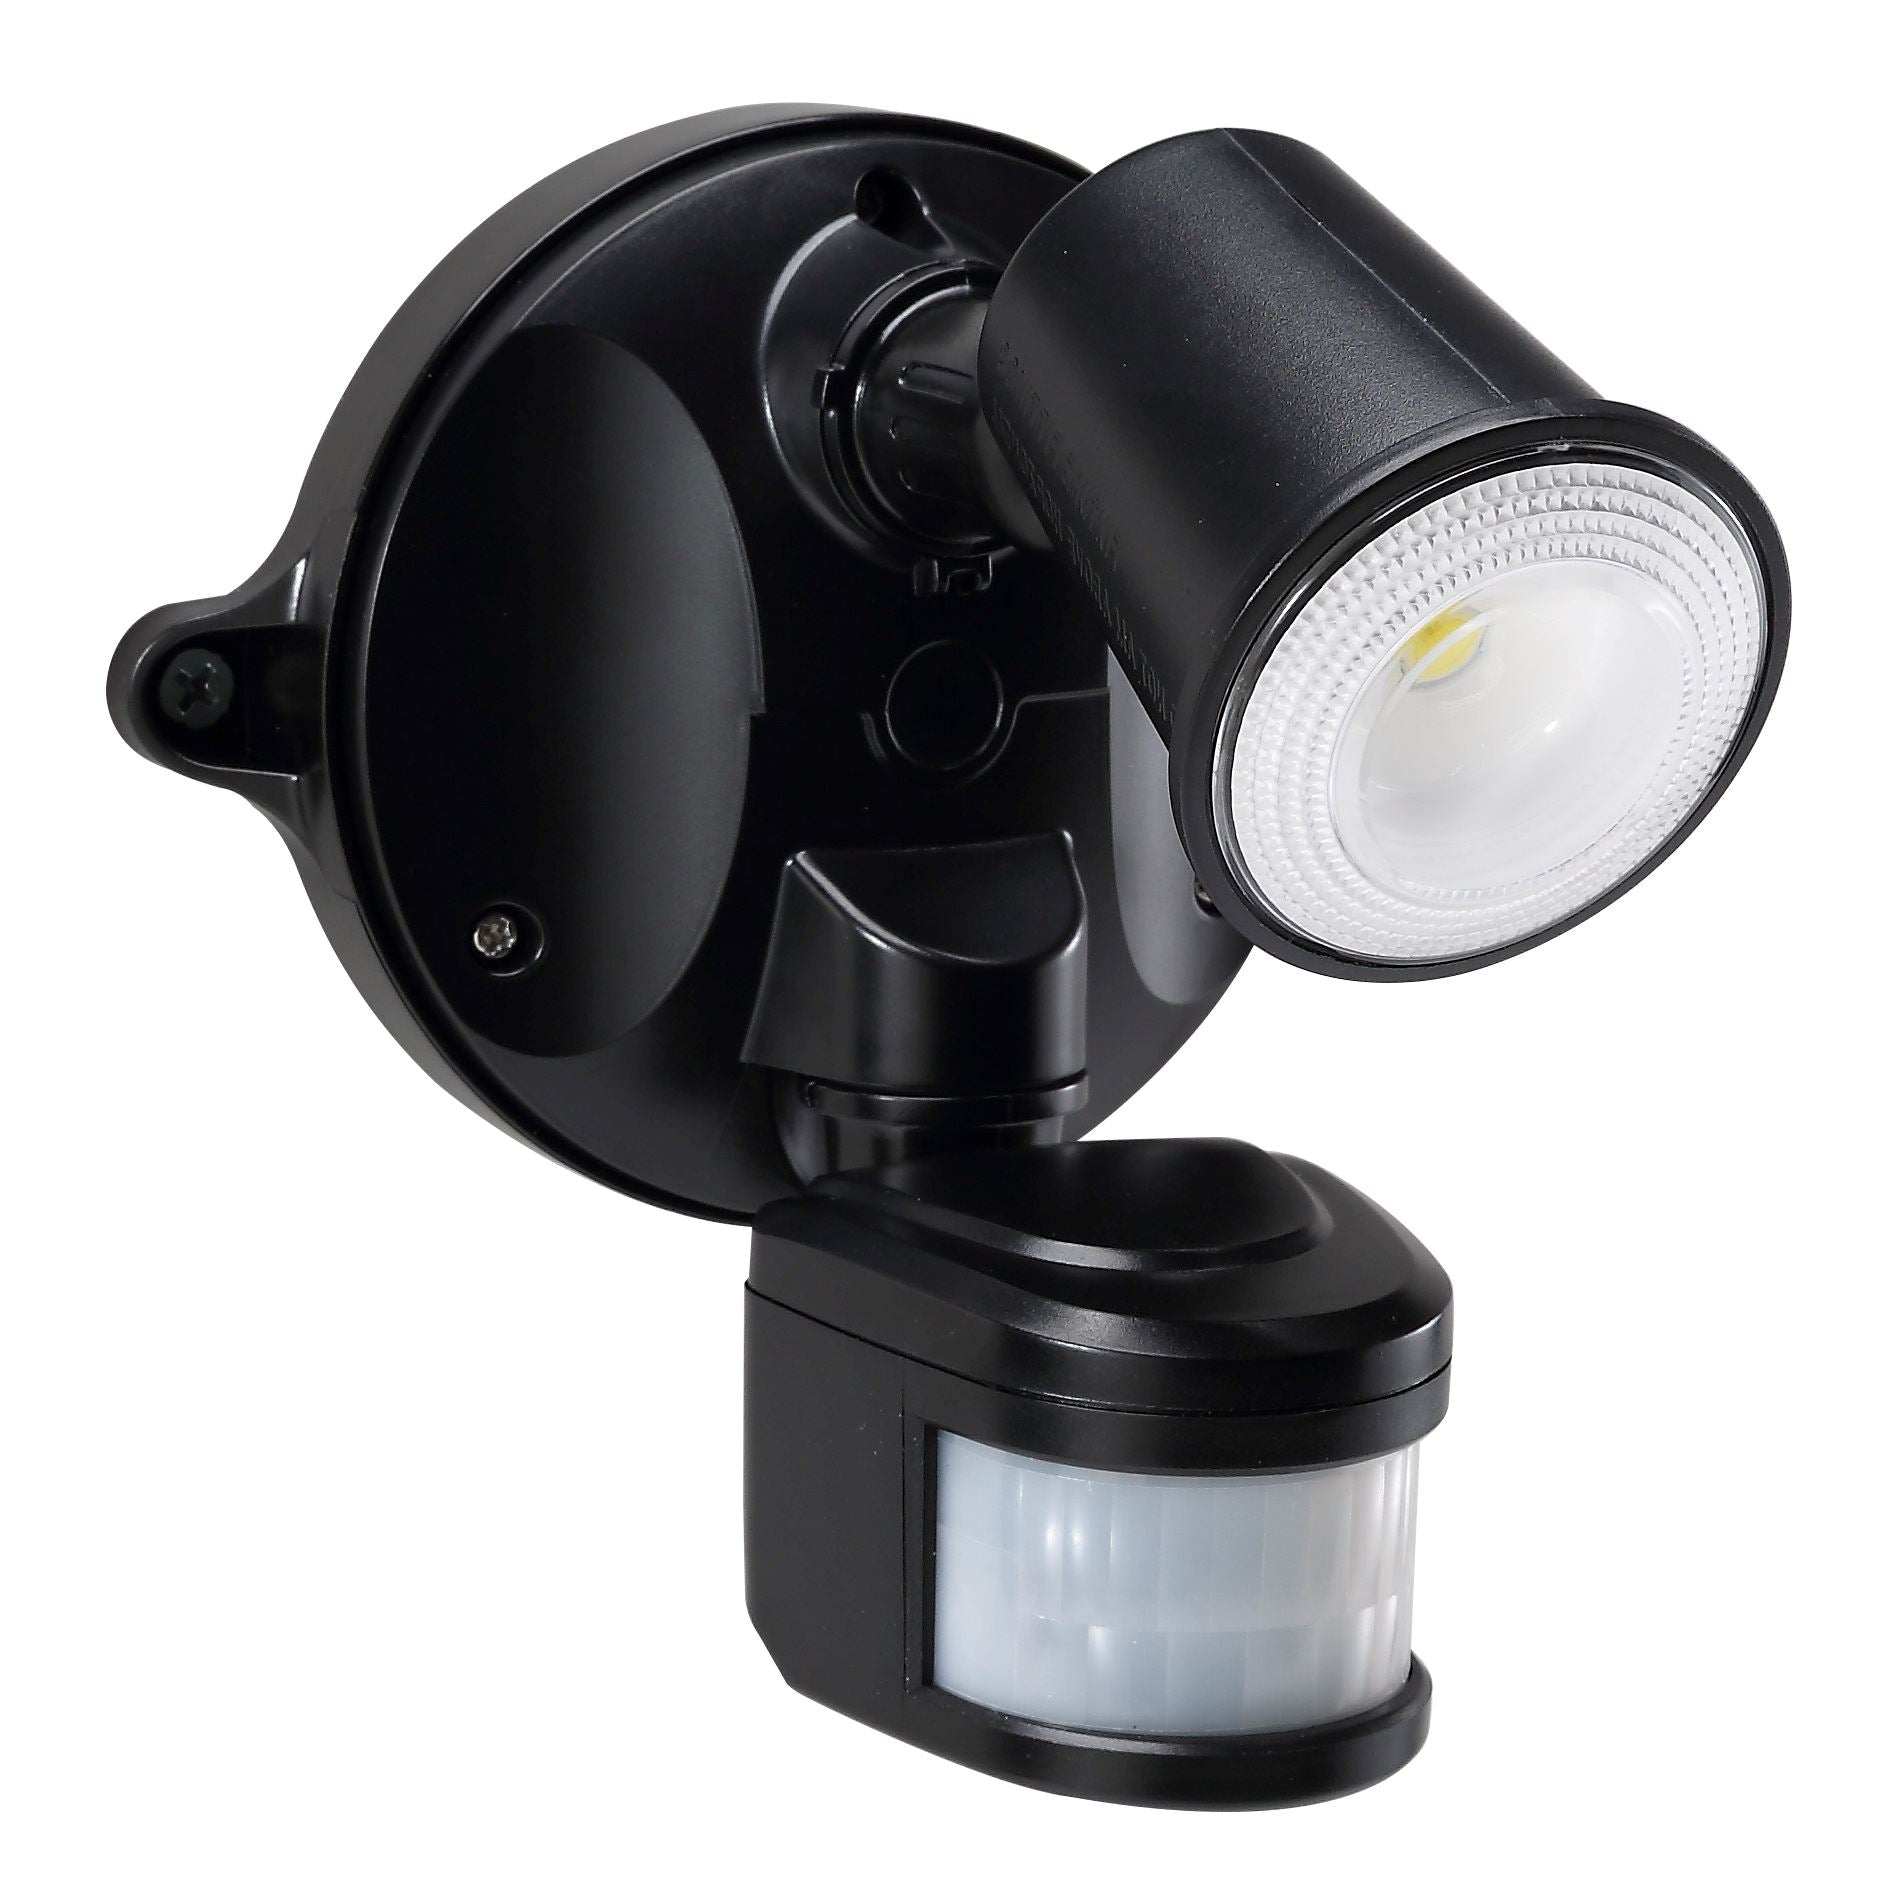 HOUSEWATCH_10W_Single_LED_Spotlight_with_Motion_Sensor._IP54._Passive_IR._9m_(Side)_&_12m_(Front)_Detection_Range._Detection_Angle_140_Degree._Includes_Timing_&_Lux